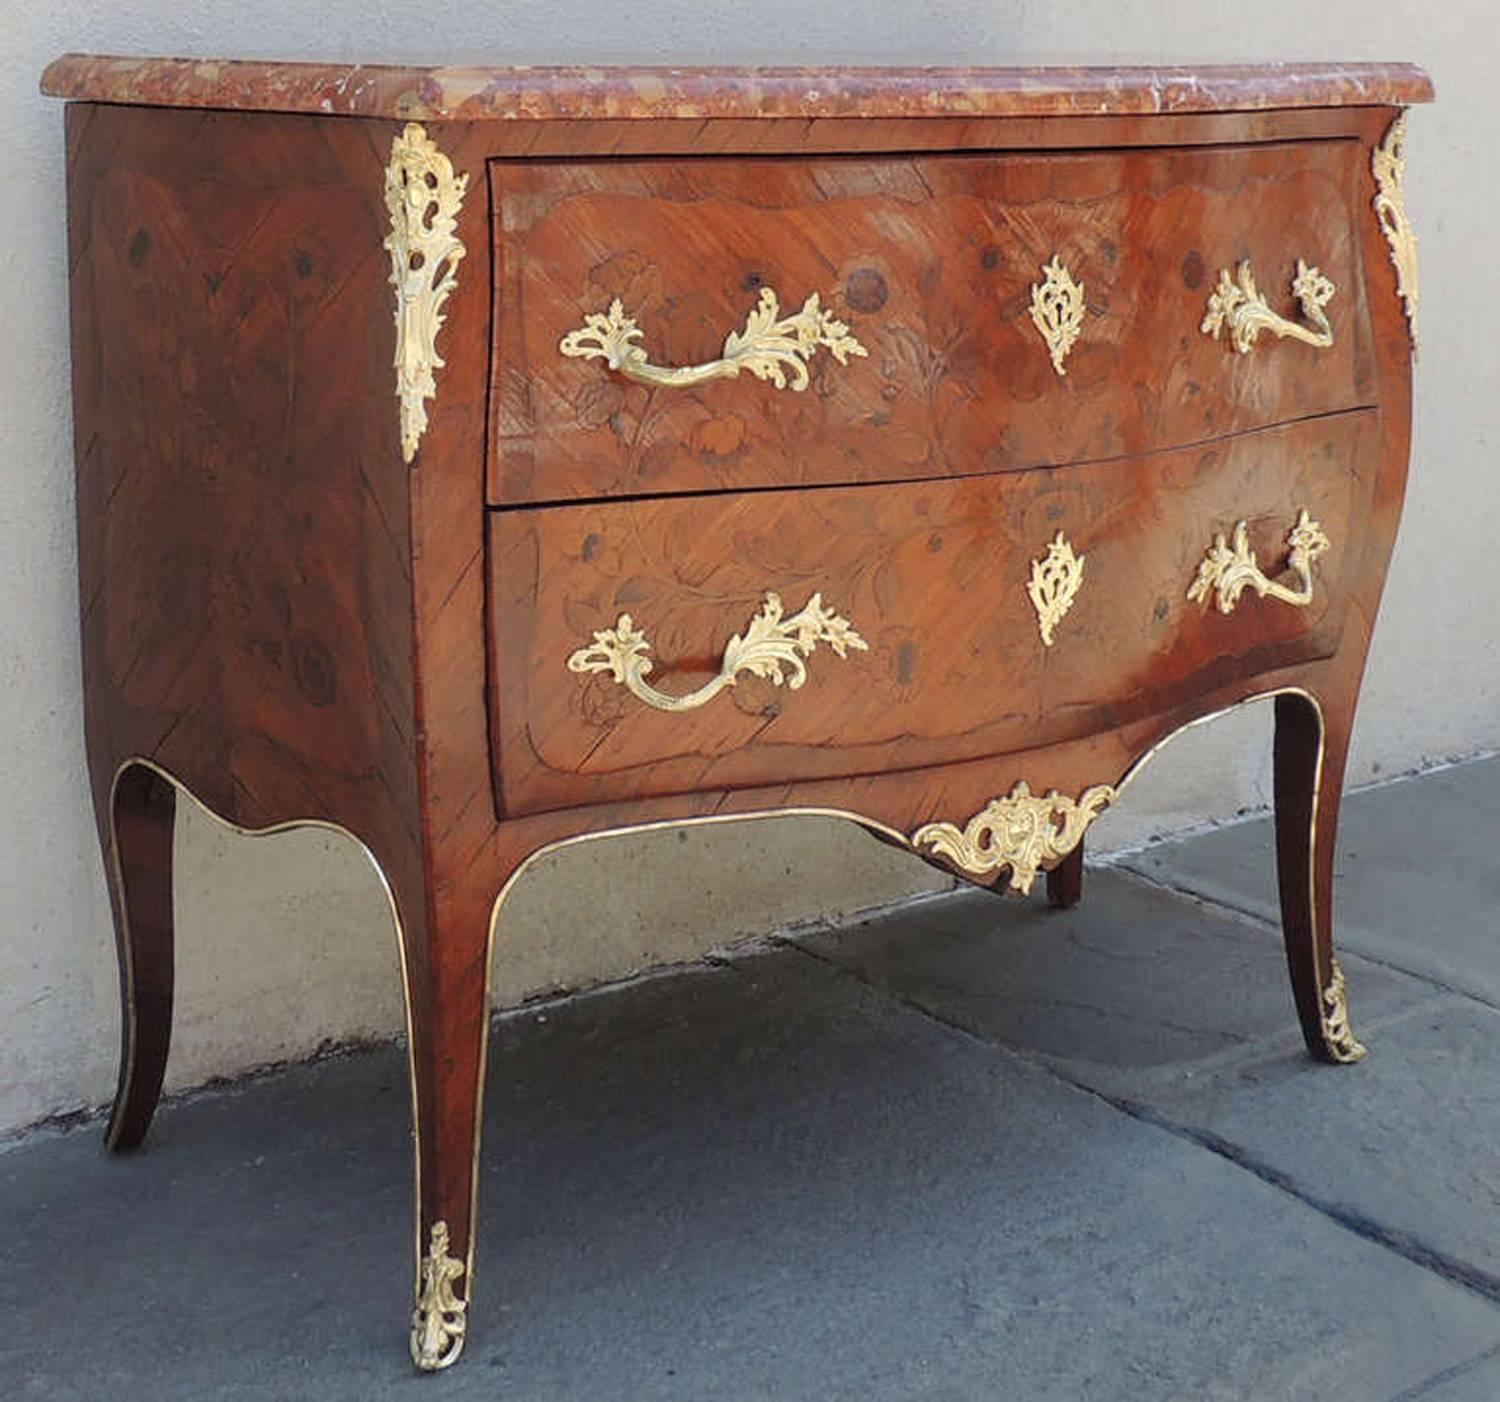 A 19th century Louis XV style Spanish chest, circa 1850, featuring floral marquetry, ormolu and a rouge marble top.